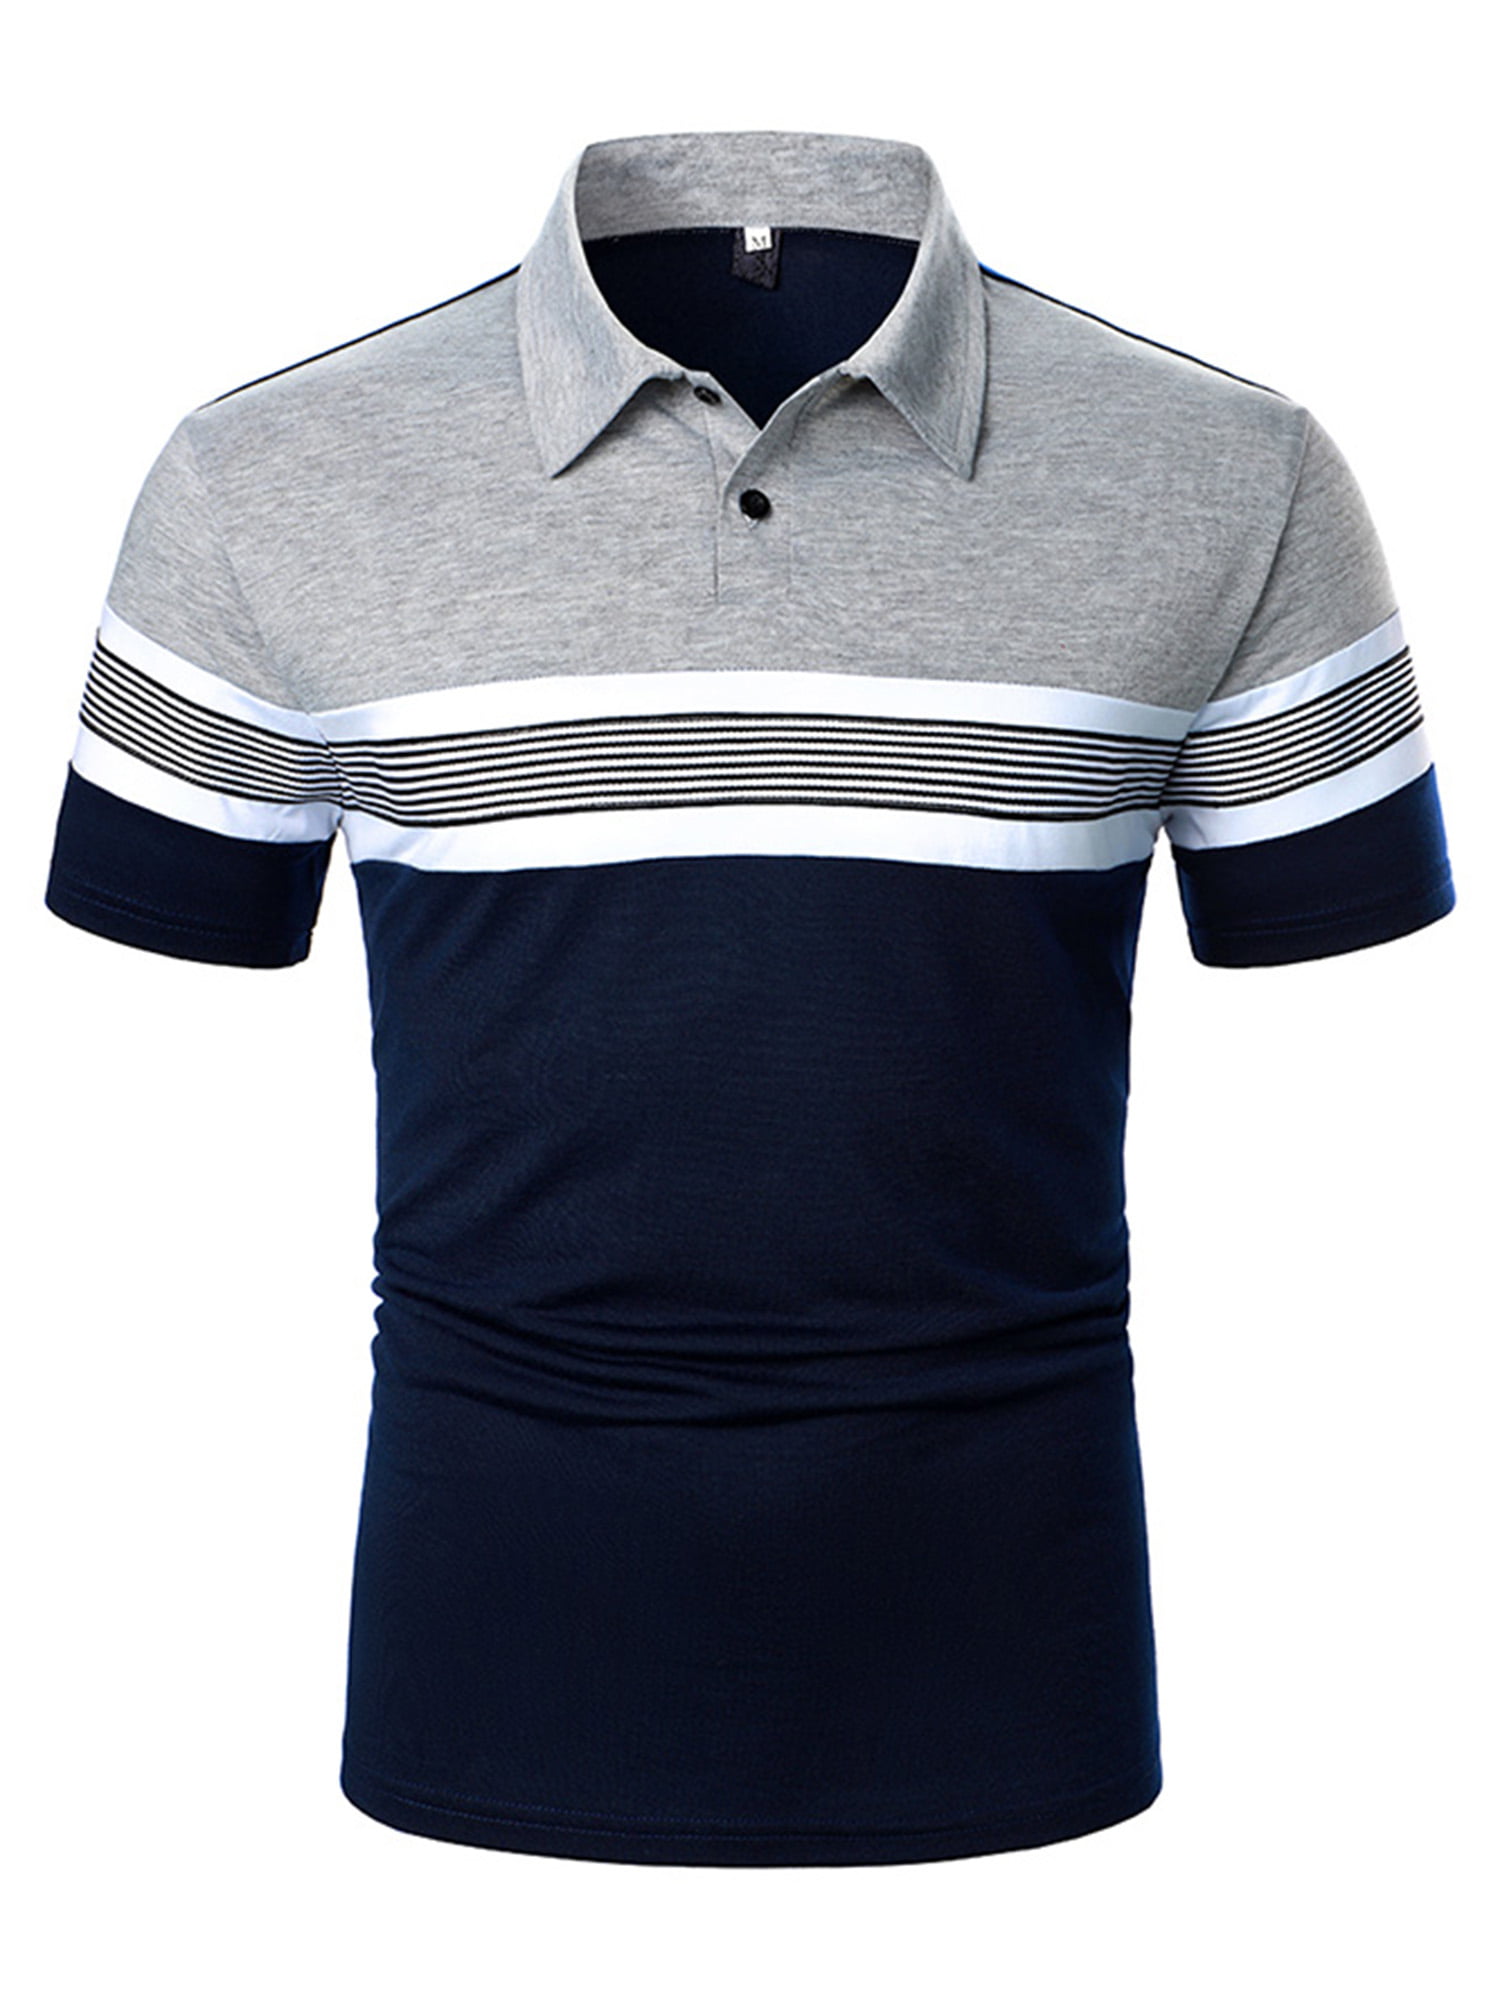 Mens Striped Polo Shirts Collared Rugby T Shirt Summer Tee Short Sleeve S M L XL